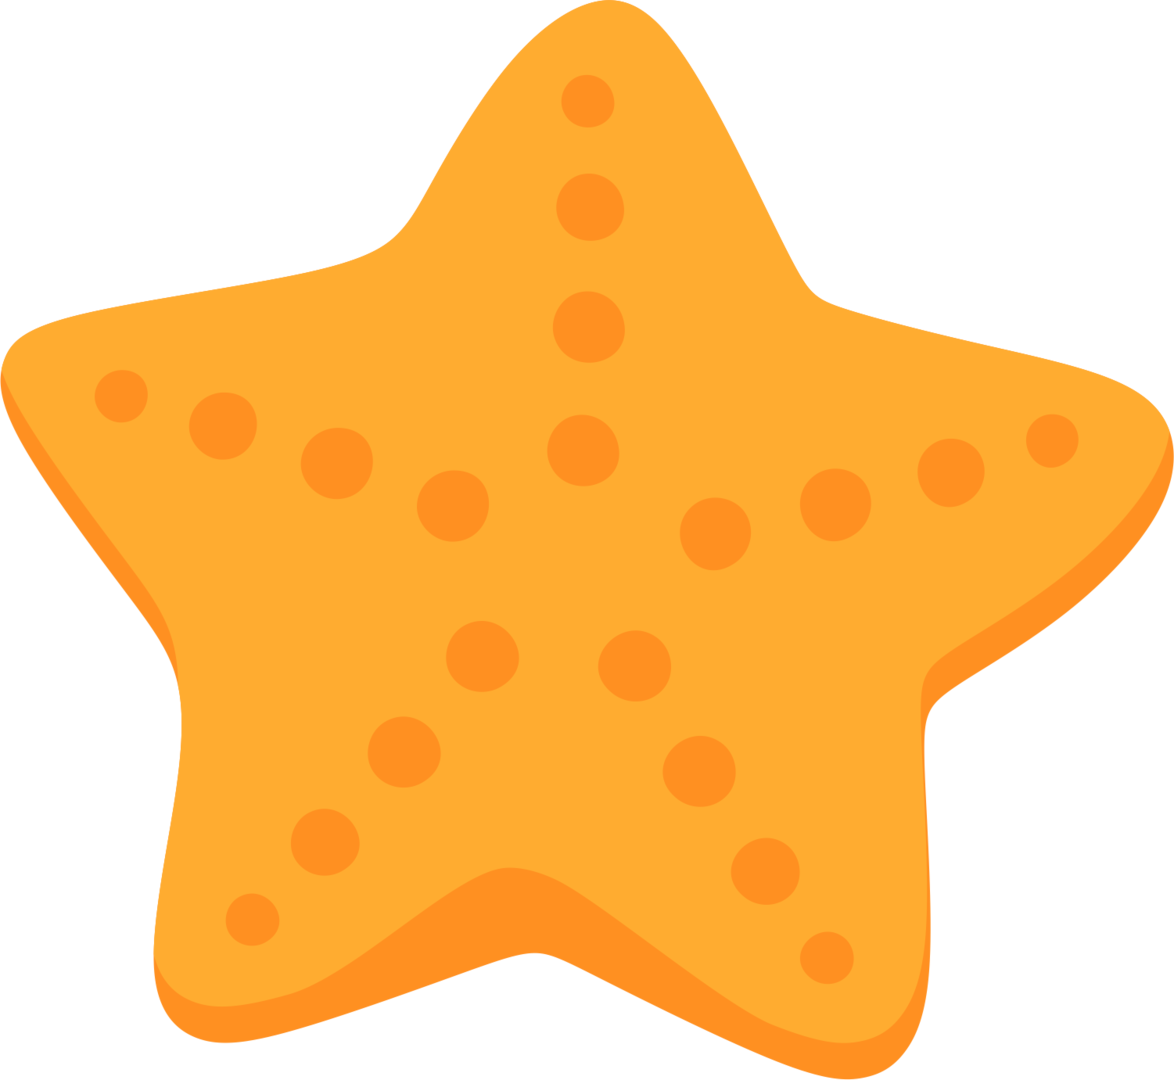 A Yellow Starfish With Dots